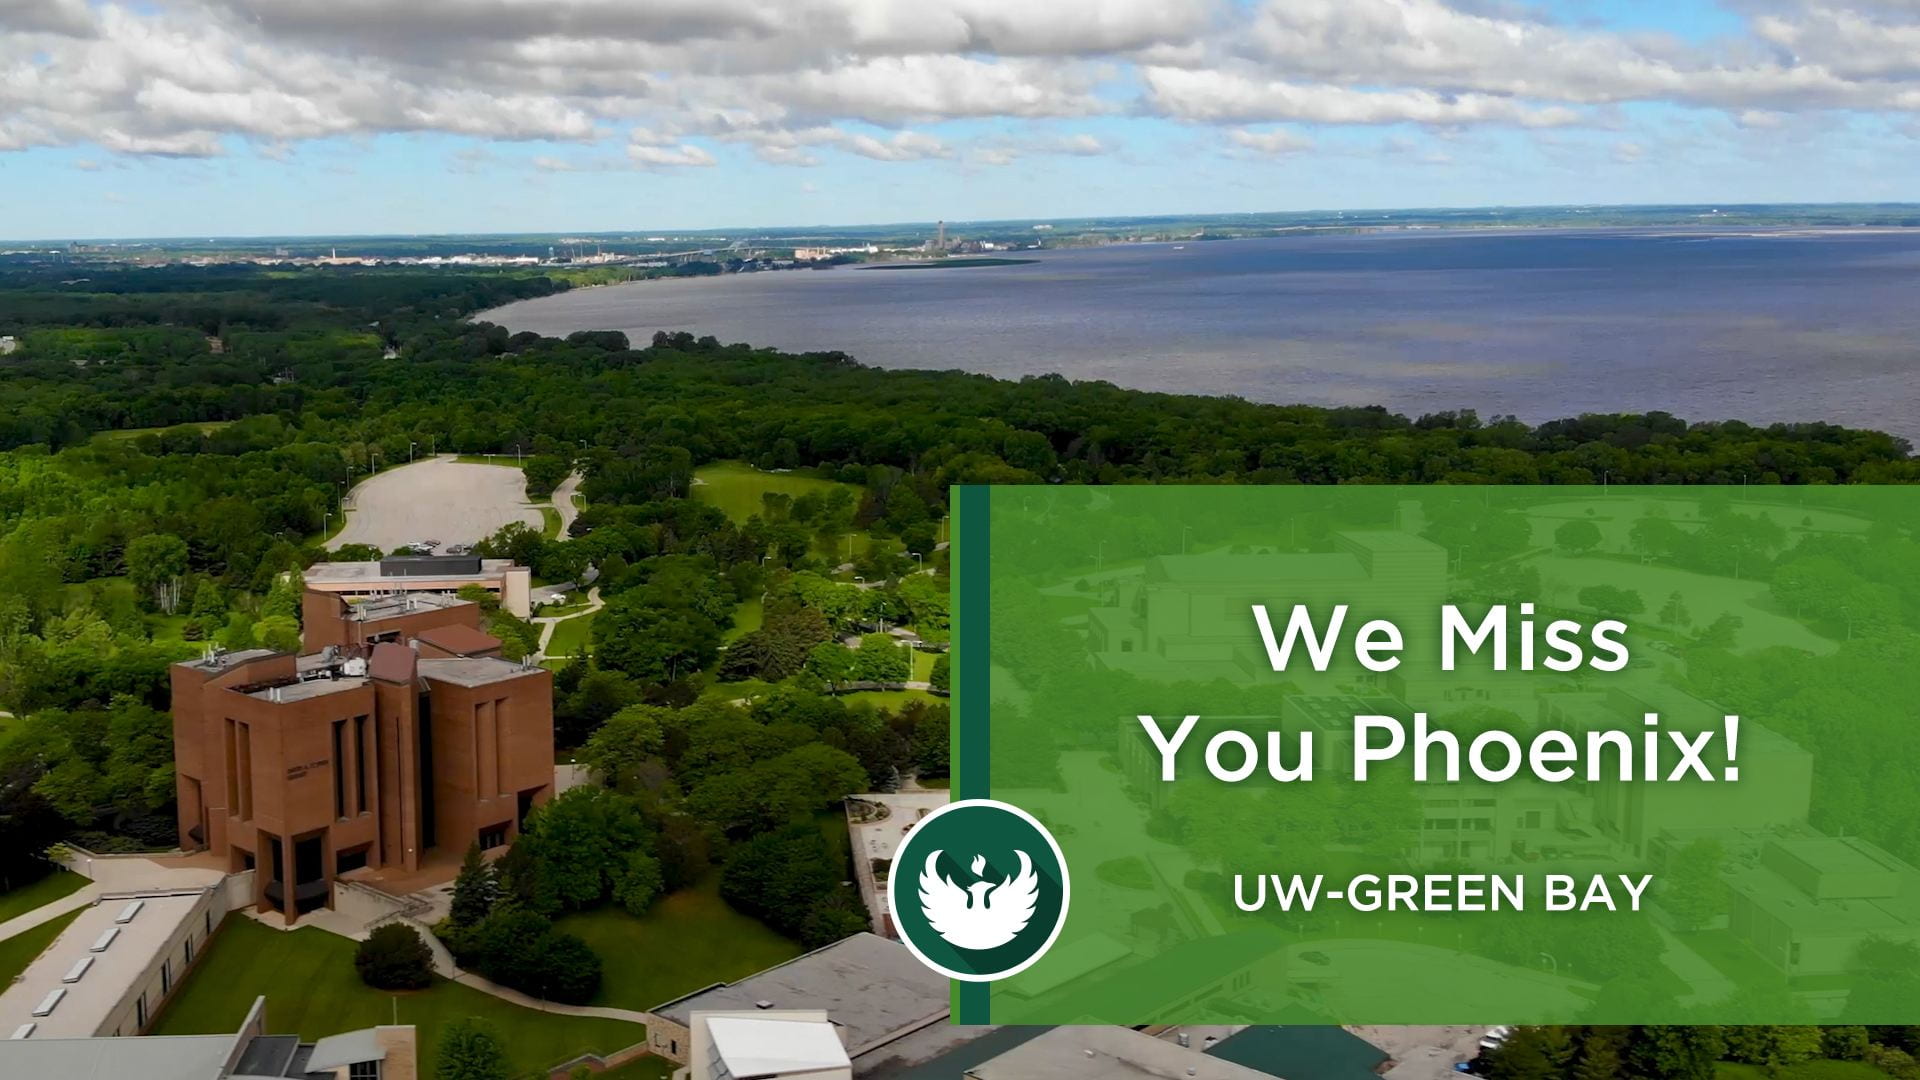 Image of the UW-Green Bay campus and the bay of Green Bay with a title "We Miss You Phoenix"